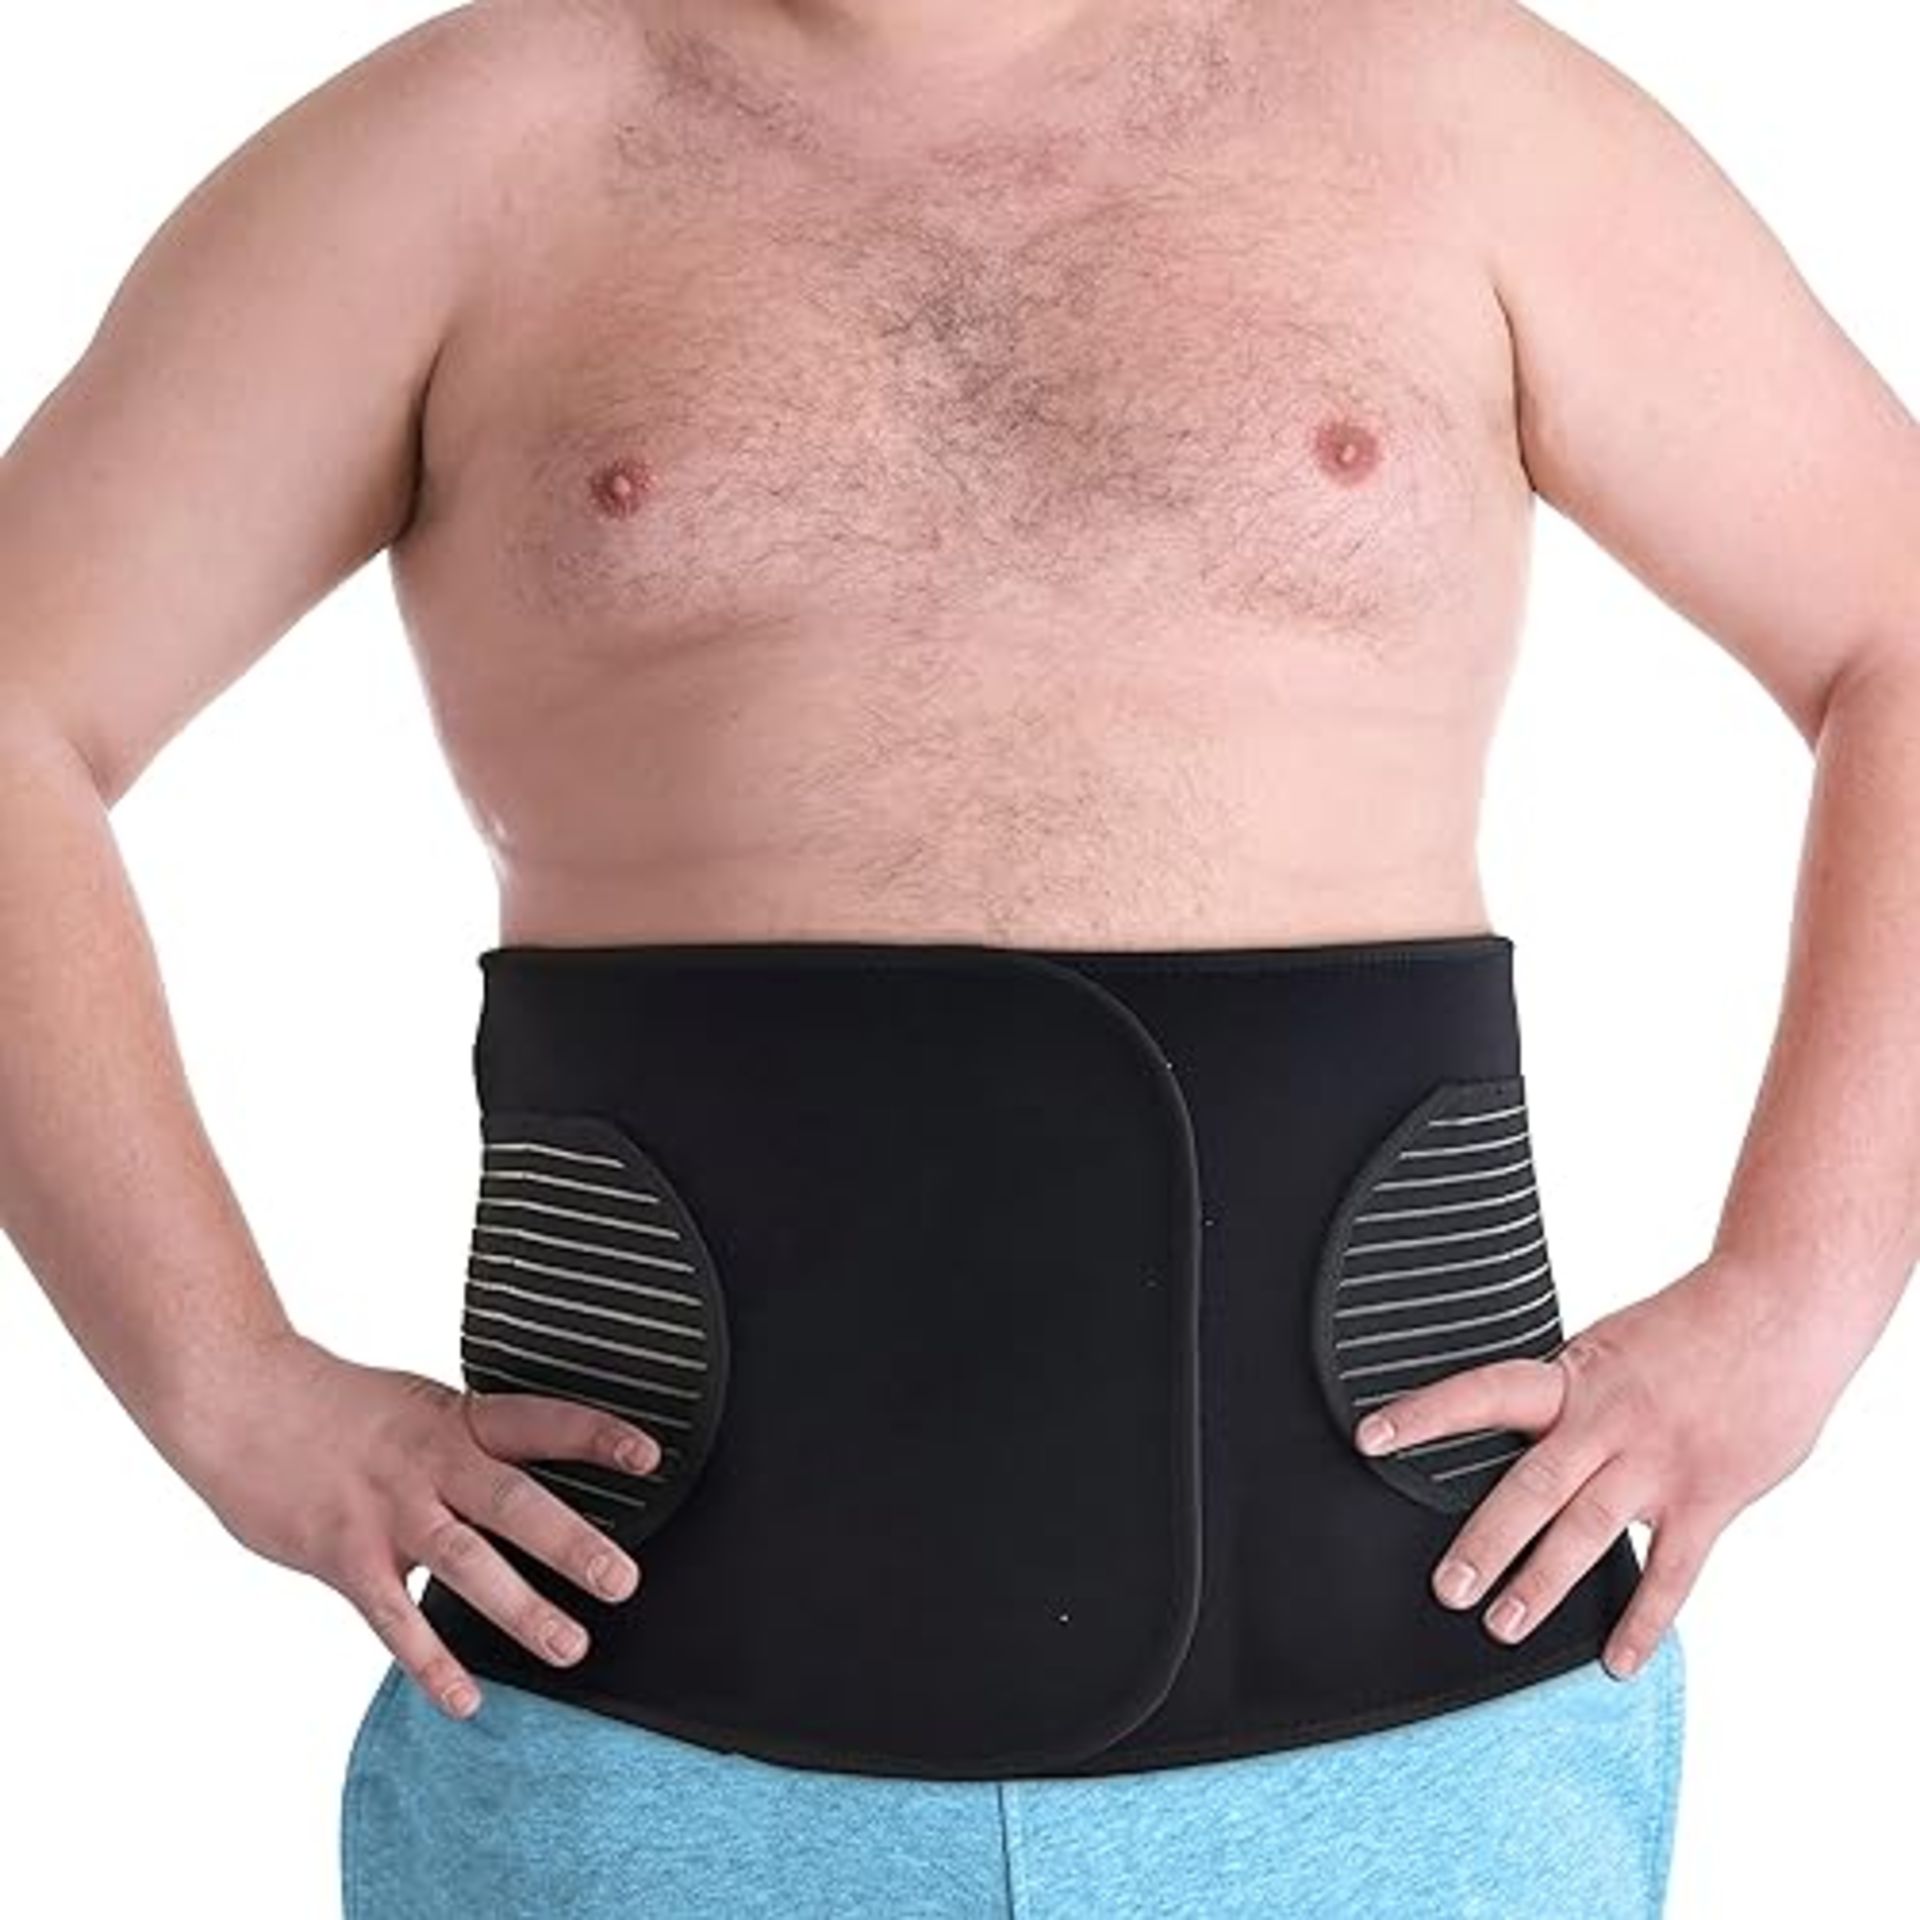 Hernia Belt for Men or Women - Plus Size Abdominal Binder Post Surgery Tummy Tuck Support Belts for